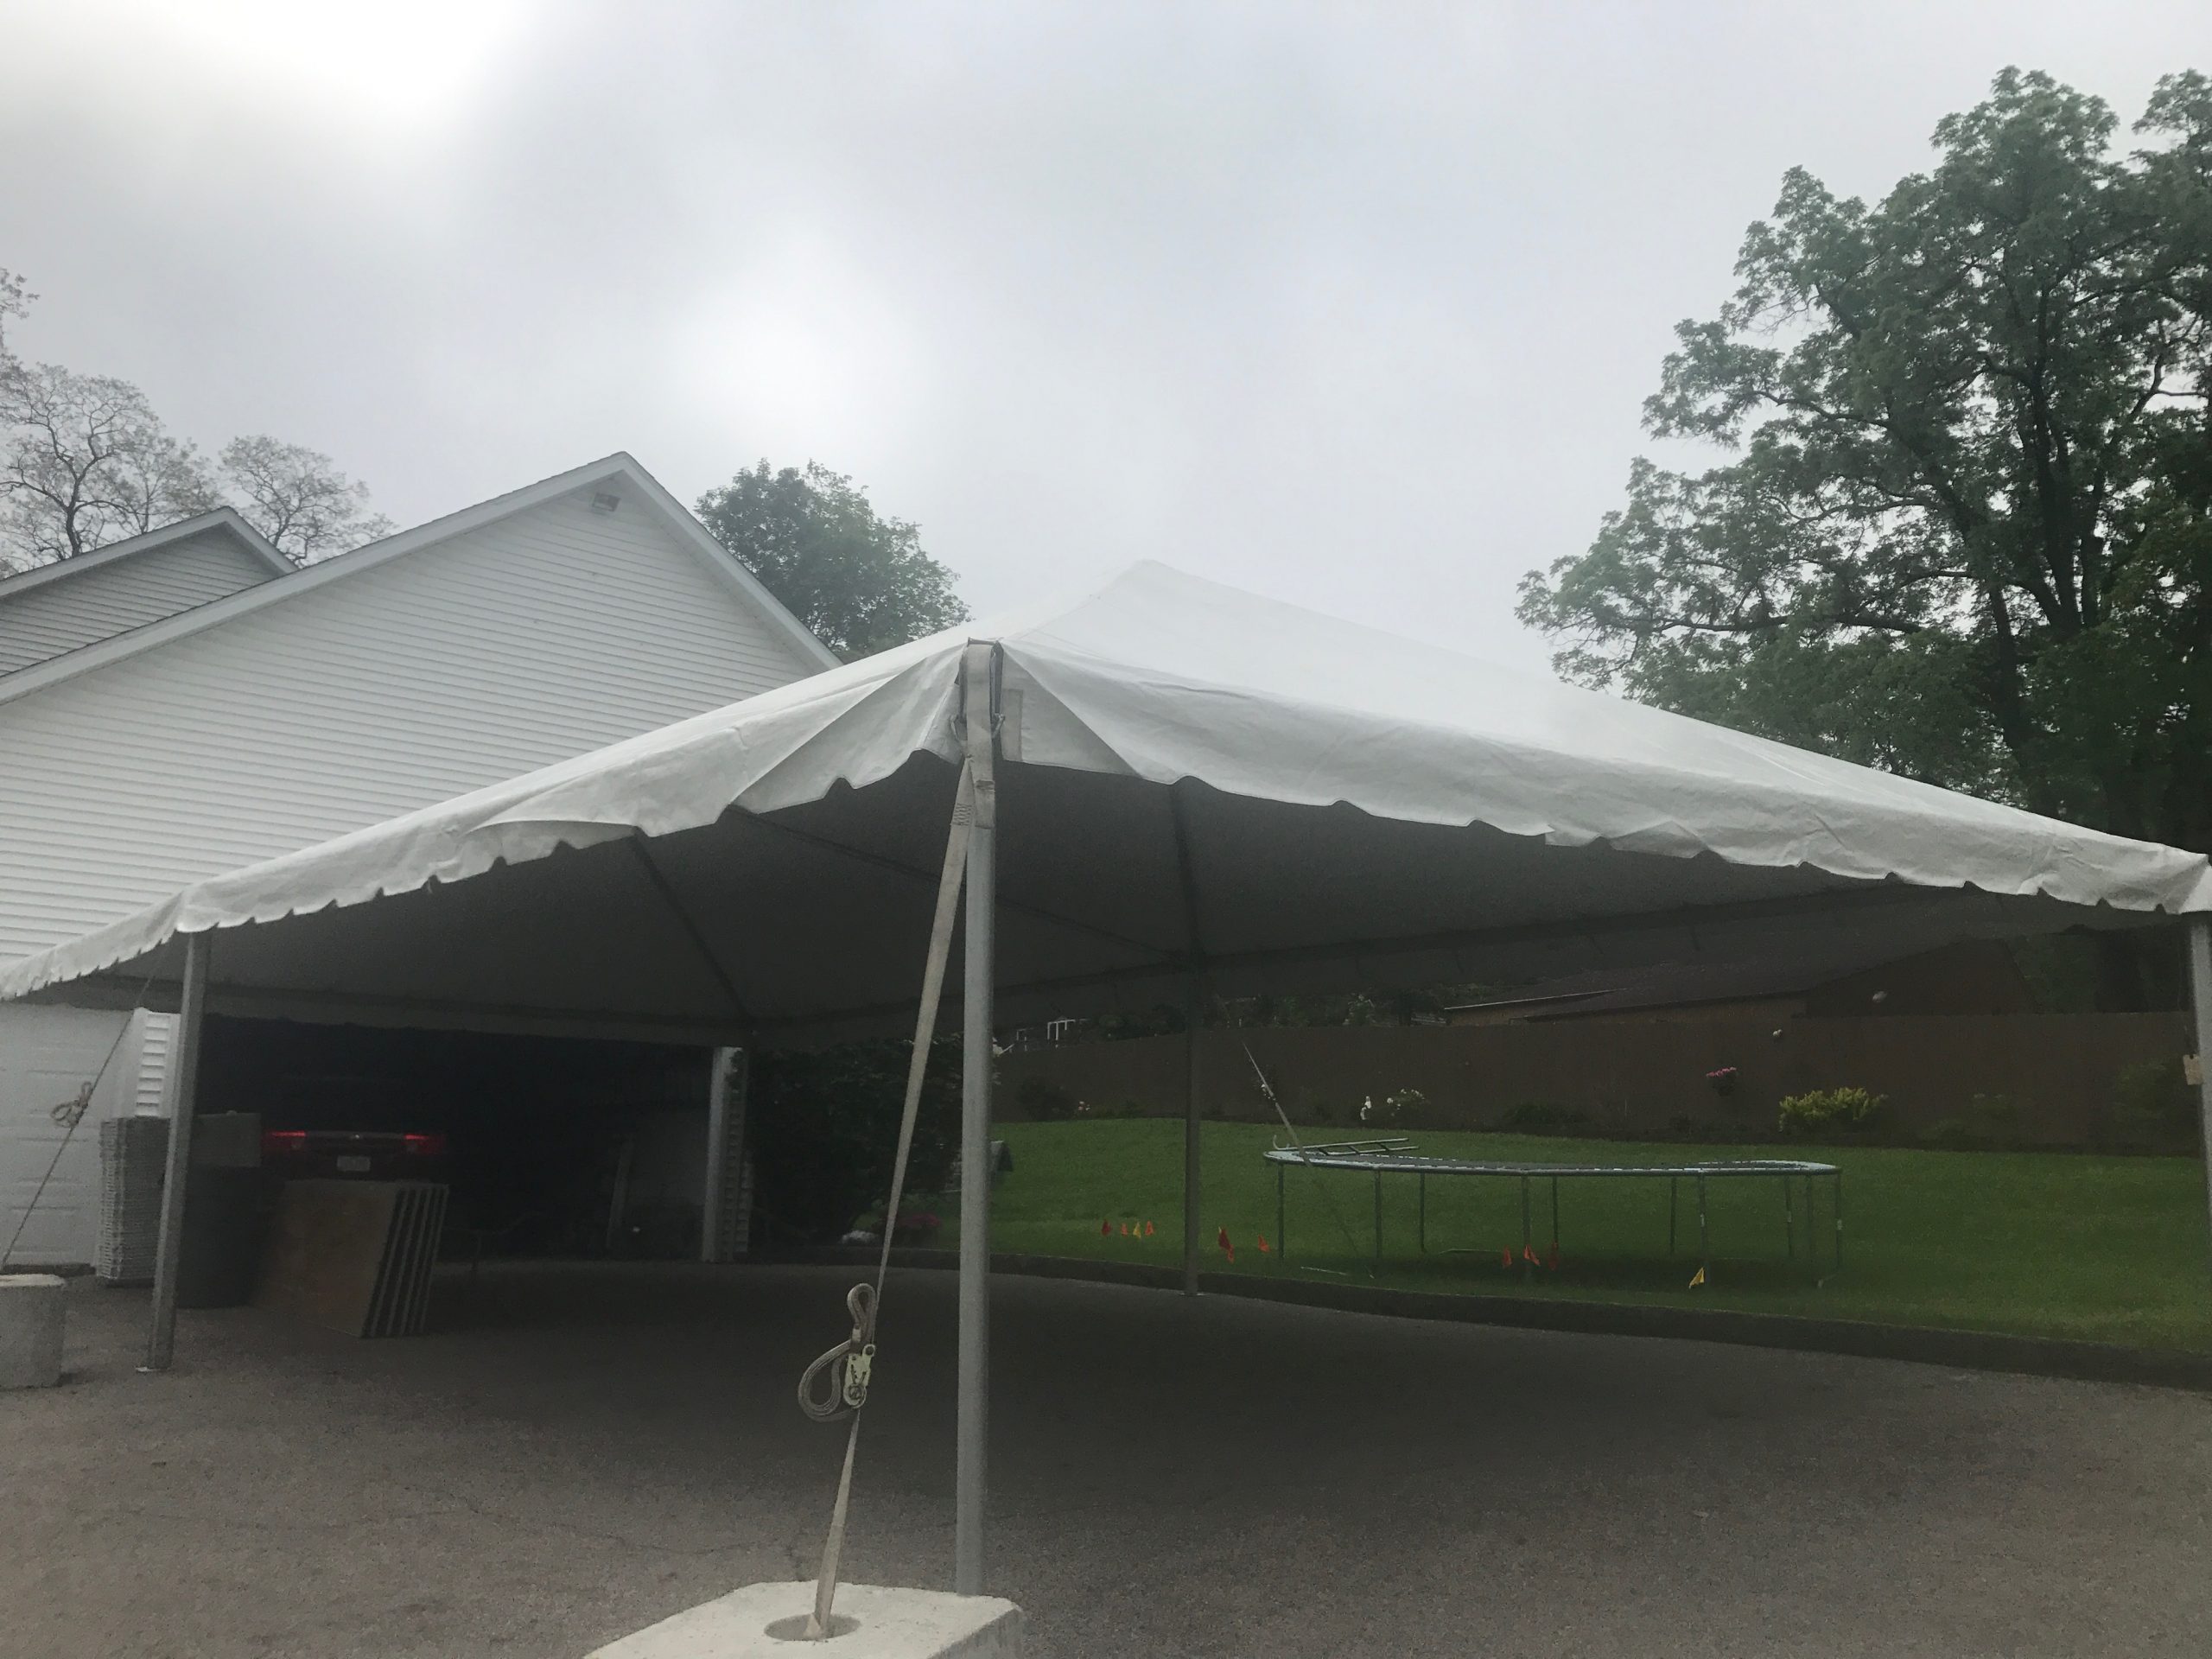 Looking under 20' x 40' frame tent next to a home for Graduation Party